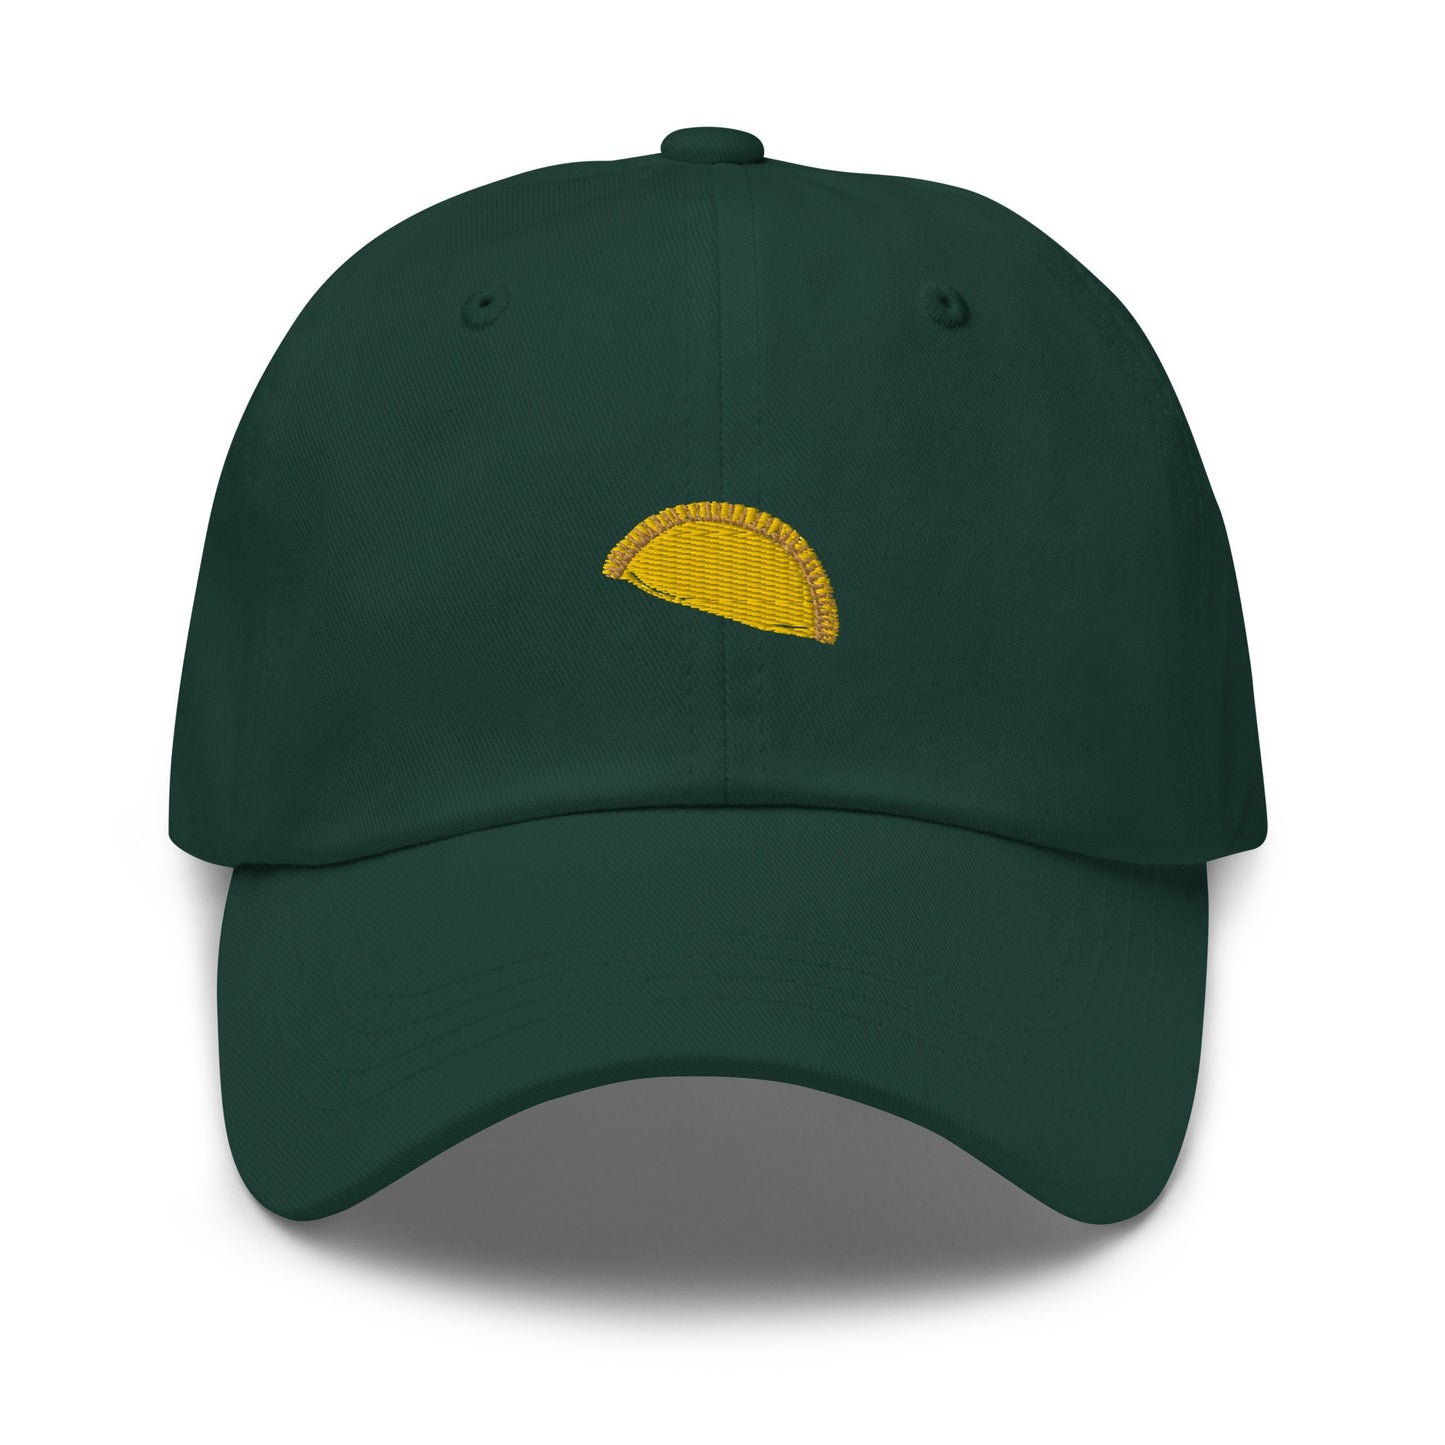 Jamaican Patty Hat - Caribbean Savoury Pastries From Heaven - Spicy Hand Pie - Cotton Embroidered Baseball Cap - Multiple Colors